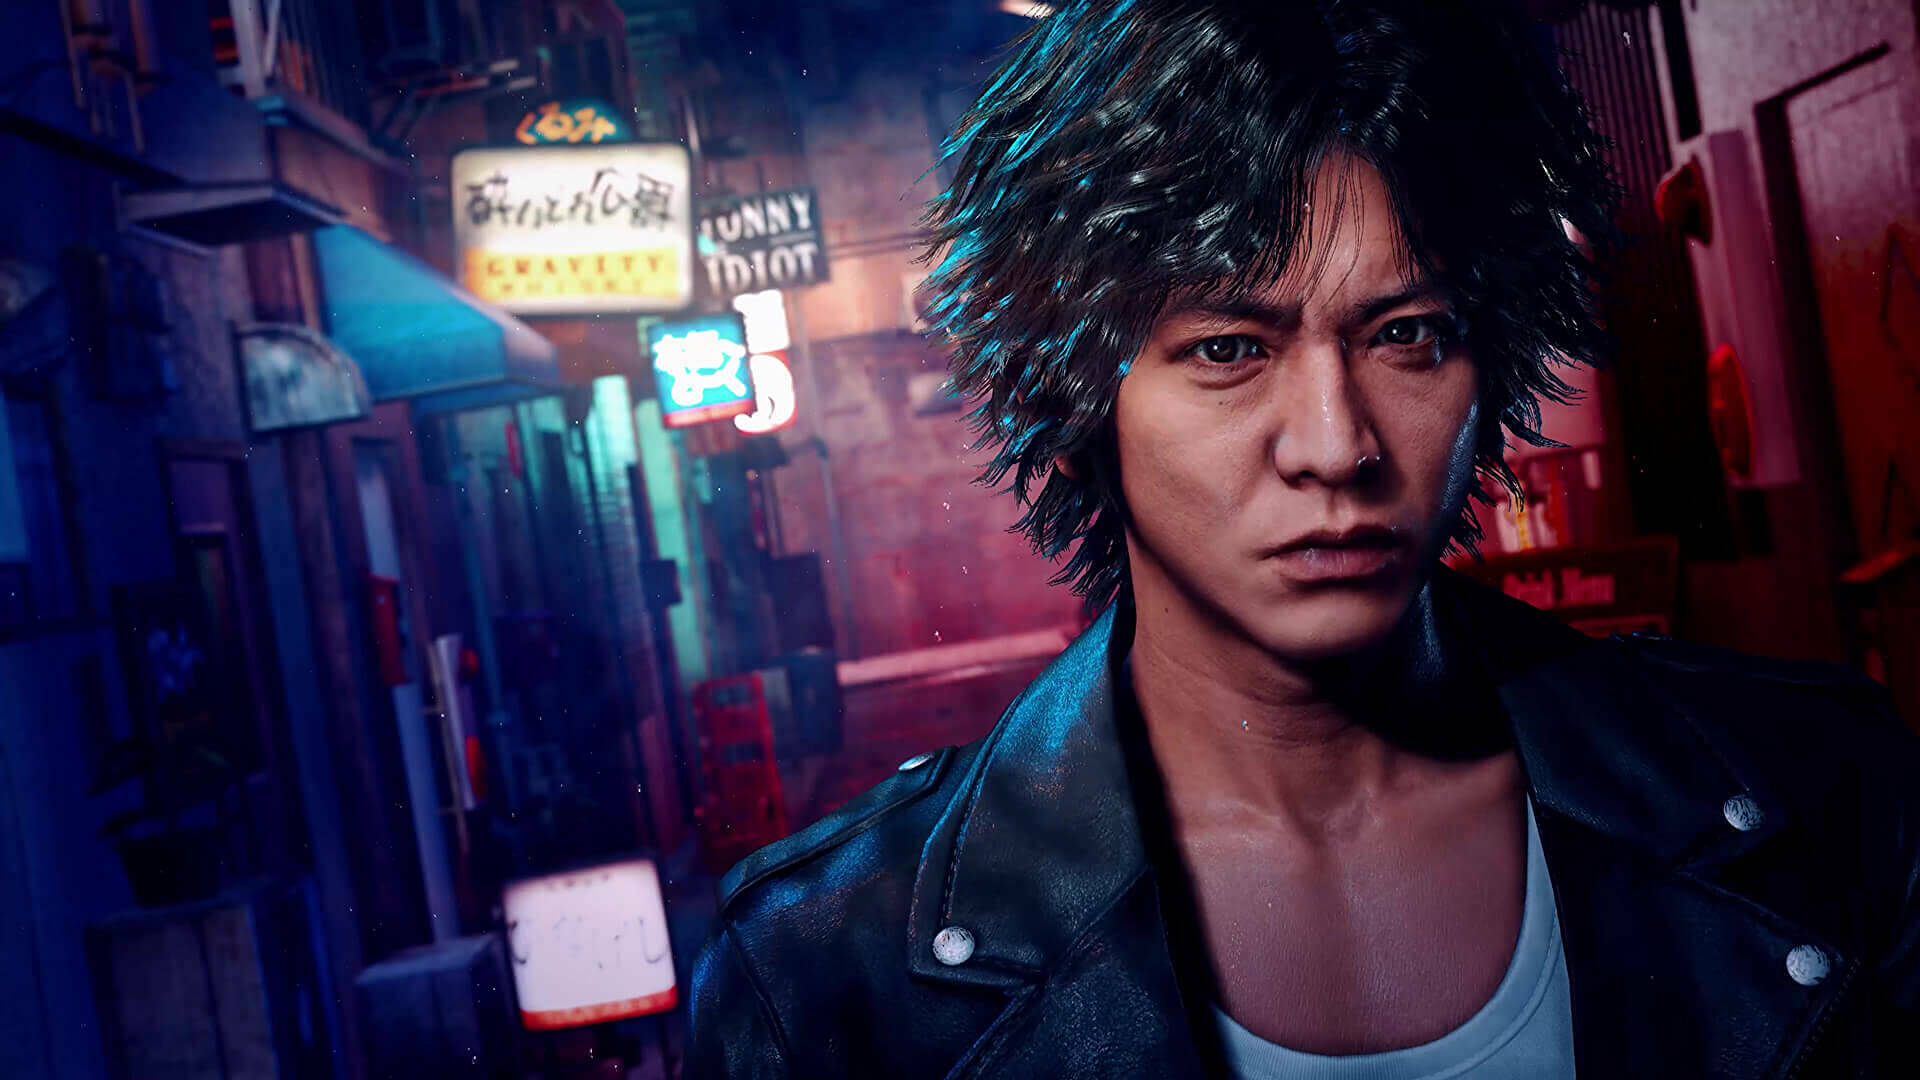 It looks like Yakuza spin-offs Judgment and Lost Judgment are headed to PC